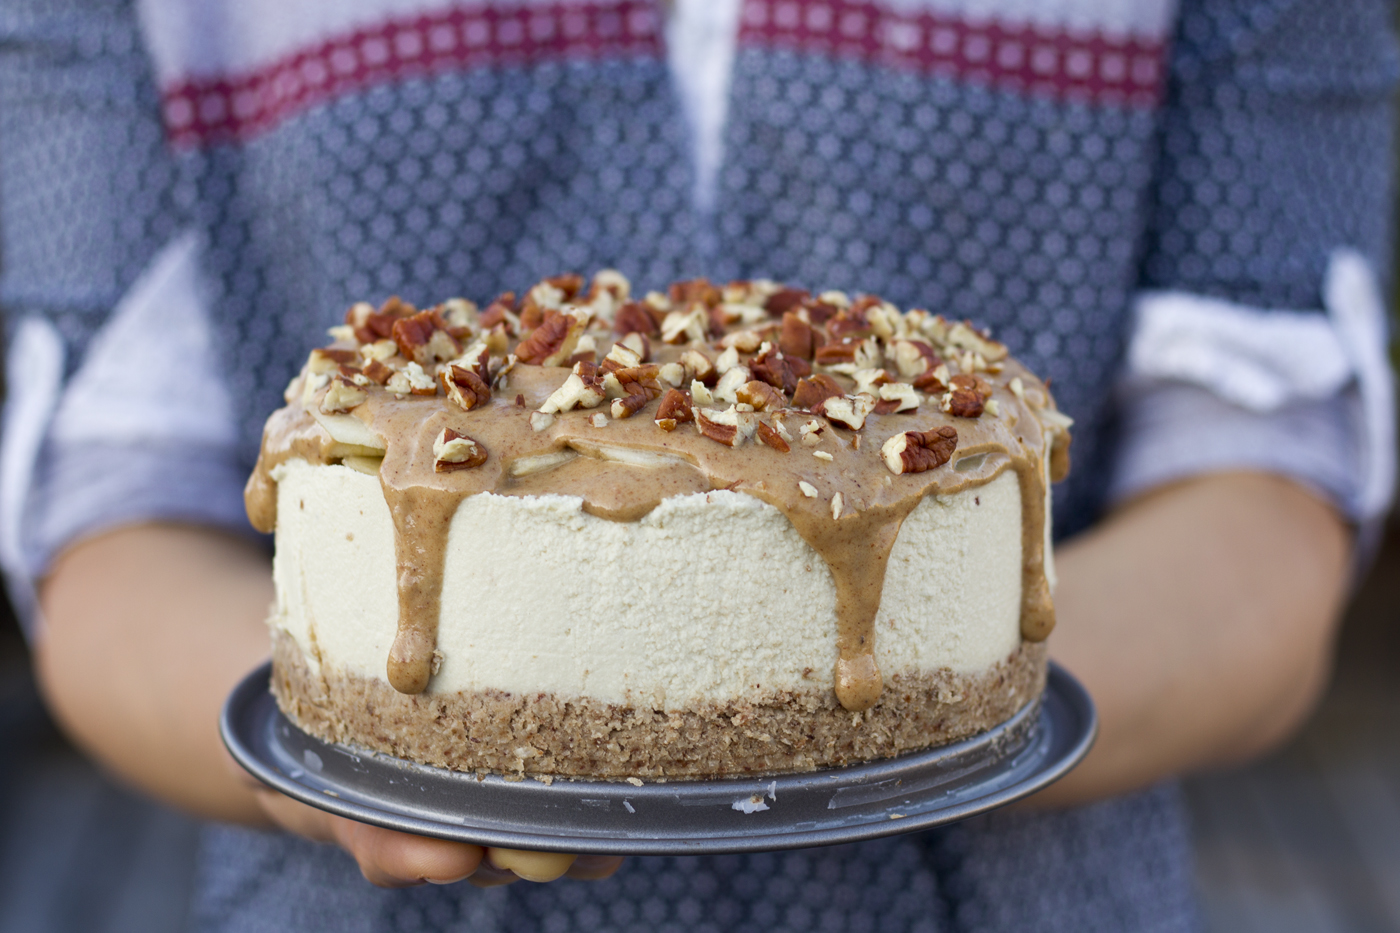 This is a salted caramel apple cheesecake recipe made by Active Vegetarian